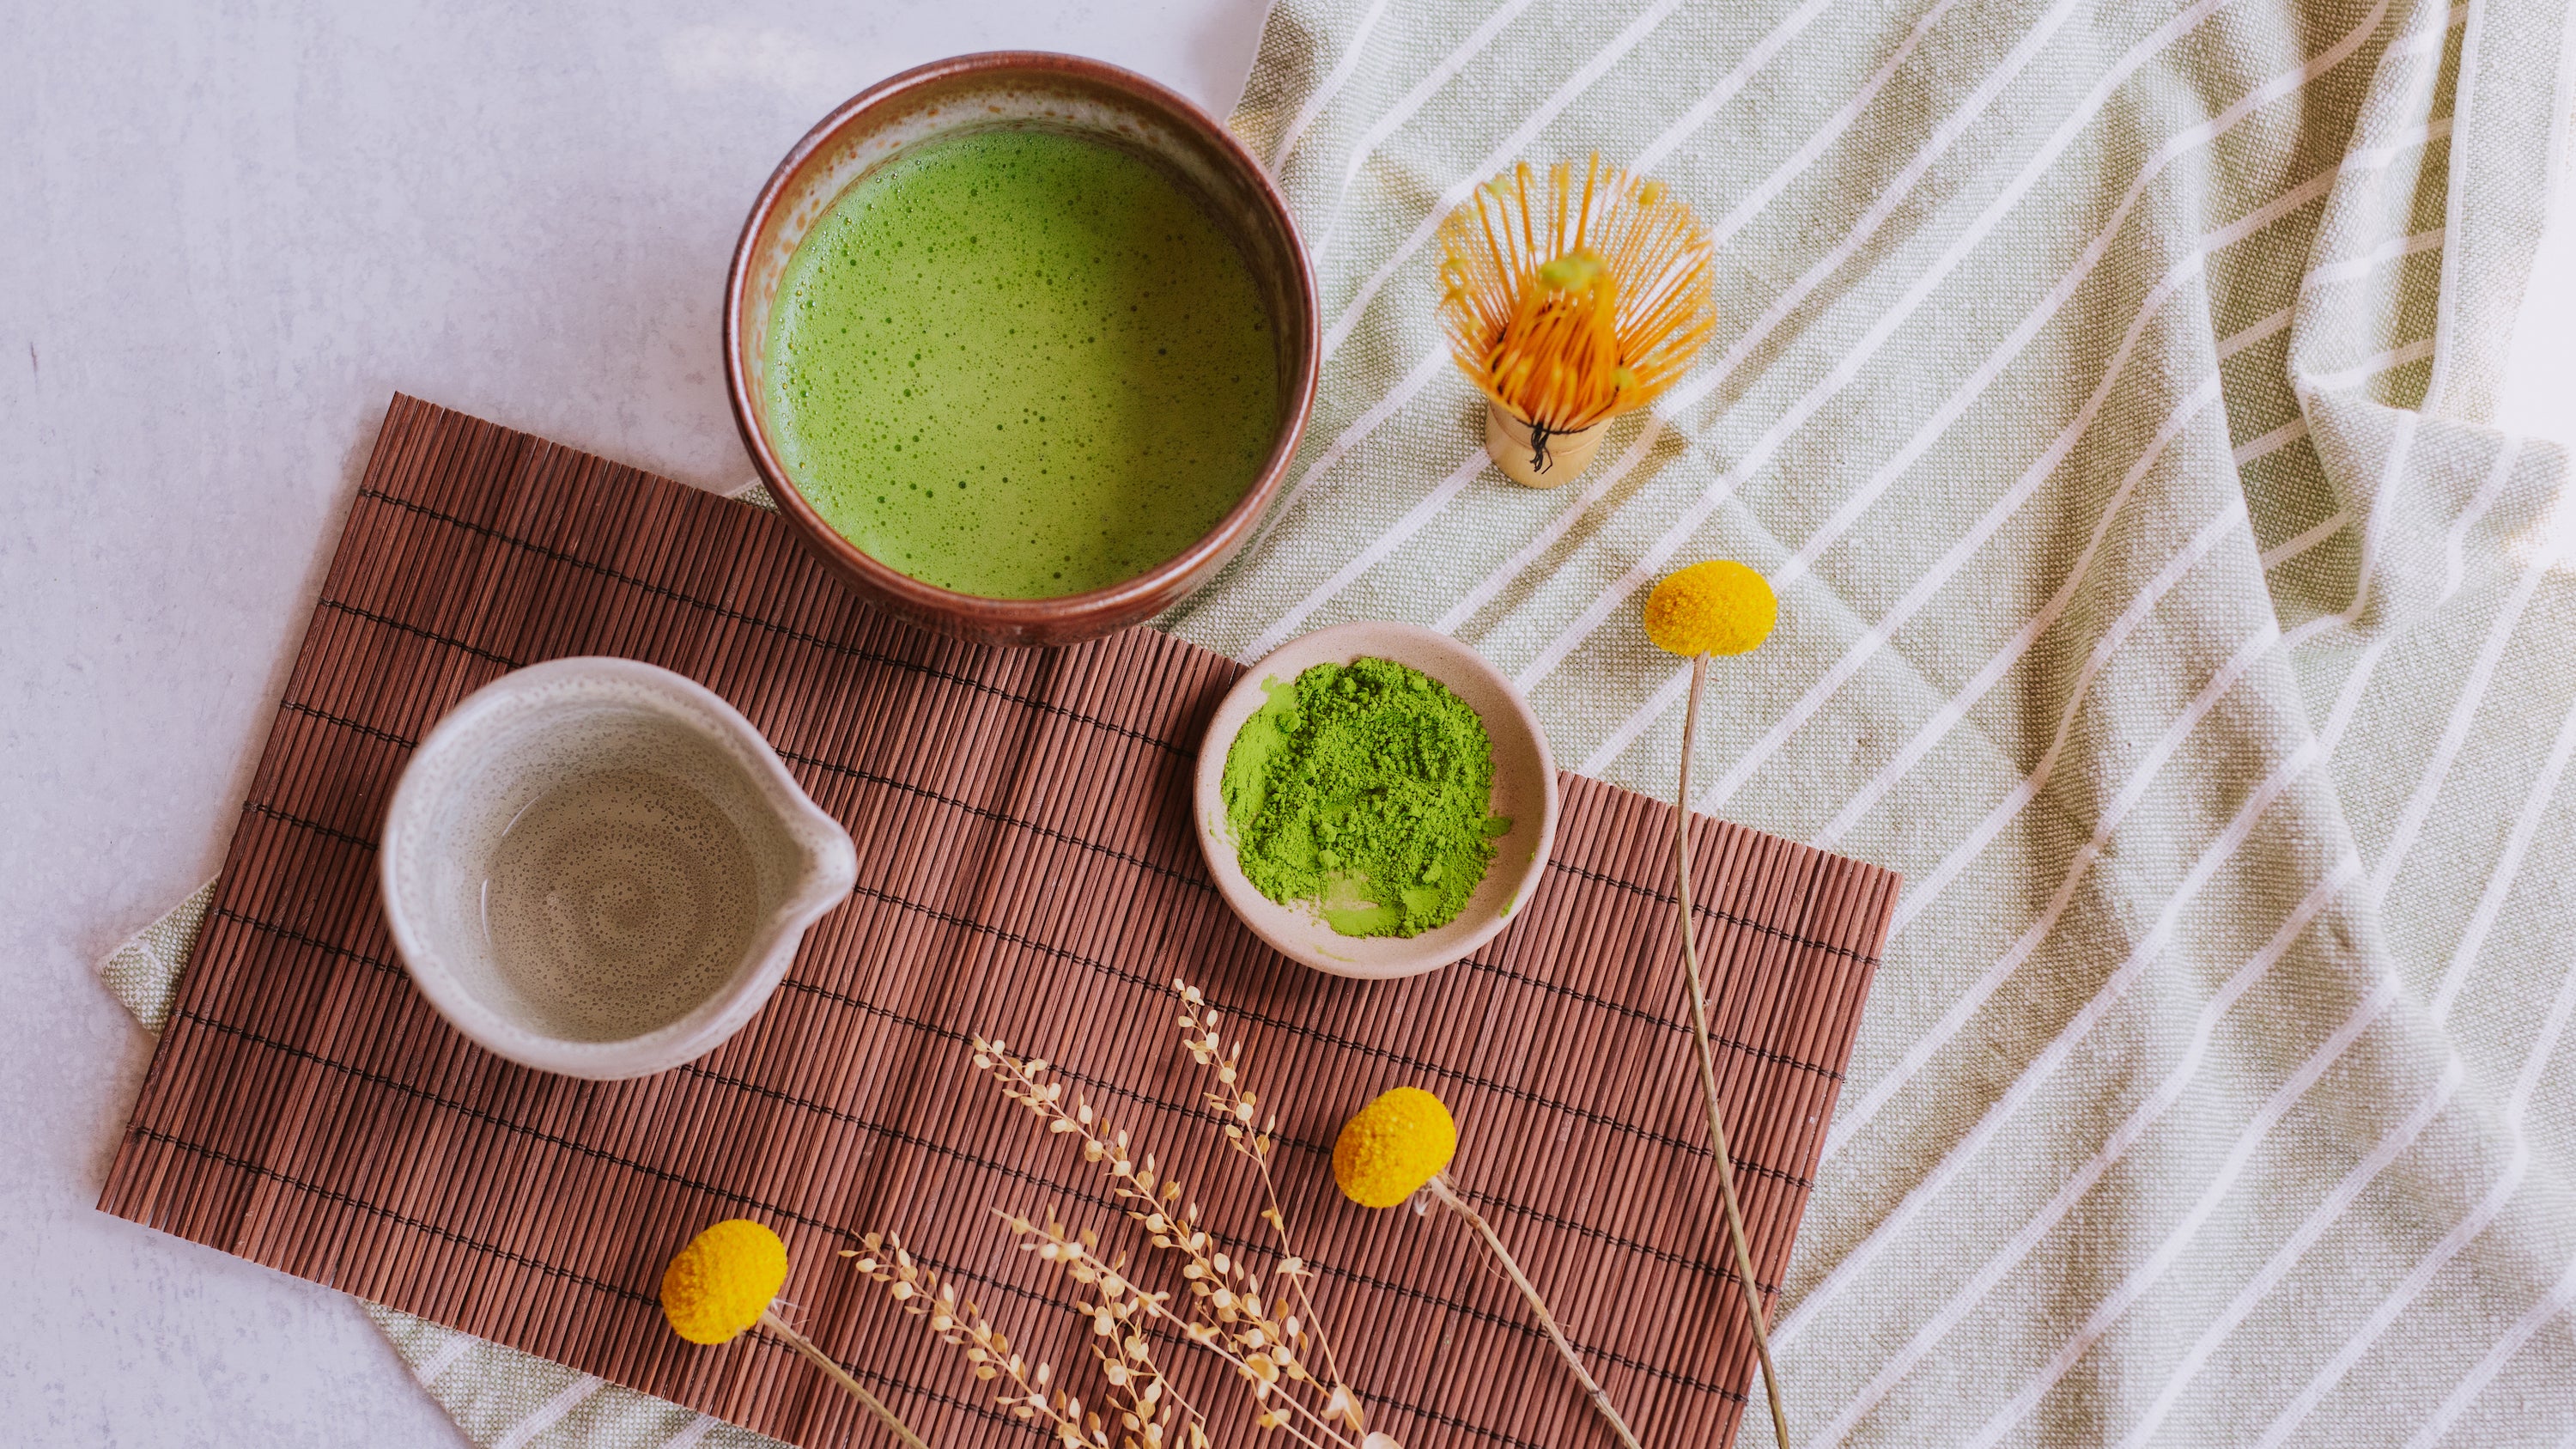 bright green, foamy bowl of ceremonial matcha with a pitcher of water, dish of matcha powder, and matcha whisk with a bit of foam still on the tines